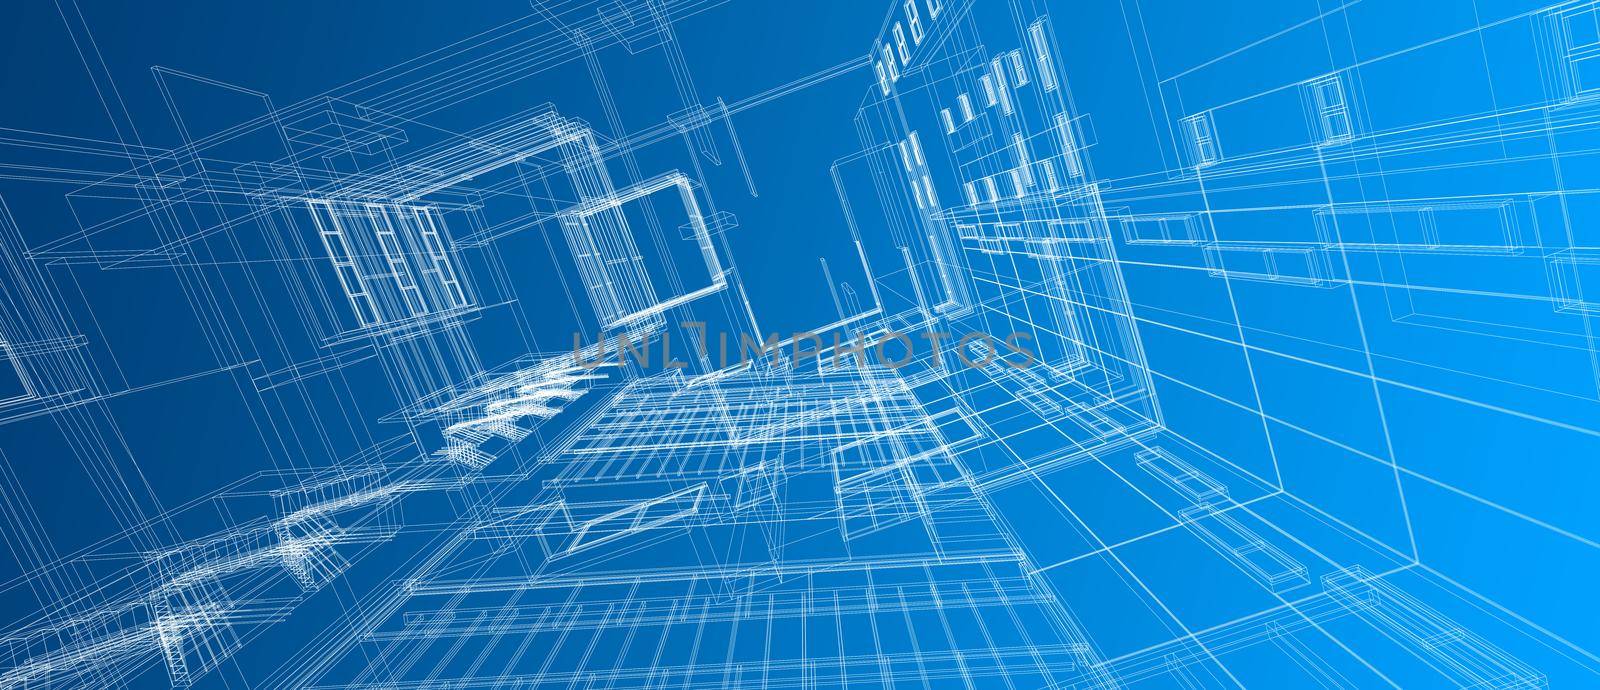 Architecture building space design concept 3d perspective white wire frame rendering gradient blue color background. For abstract background or wallpaper desktops computer technology design architectural theme. by Petrichor